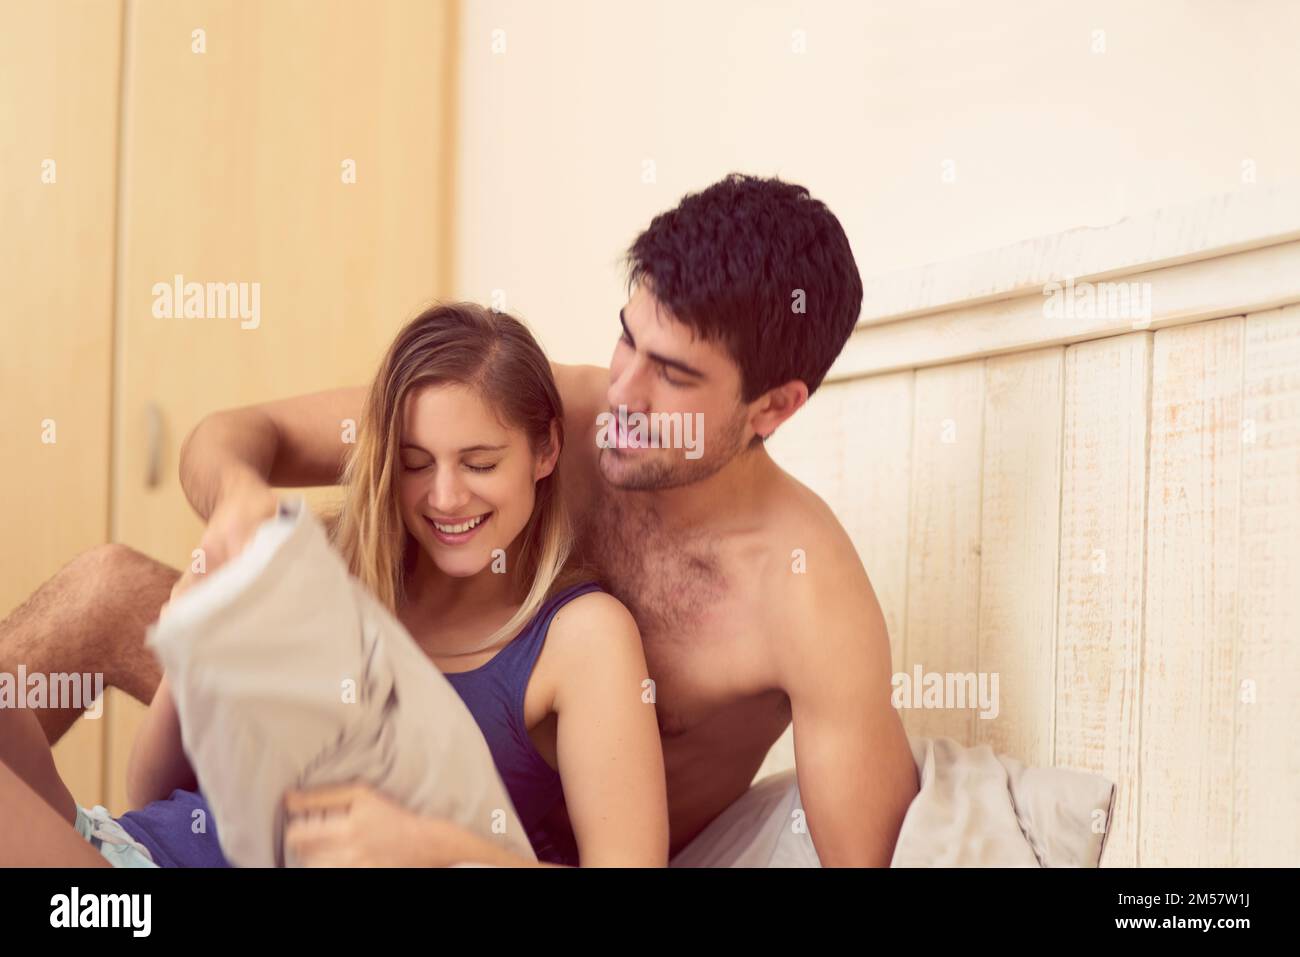 You never know when a pillow fight will break out. a happy young man initiating a pillow fight with his girlfriend in bed. Stock Photo